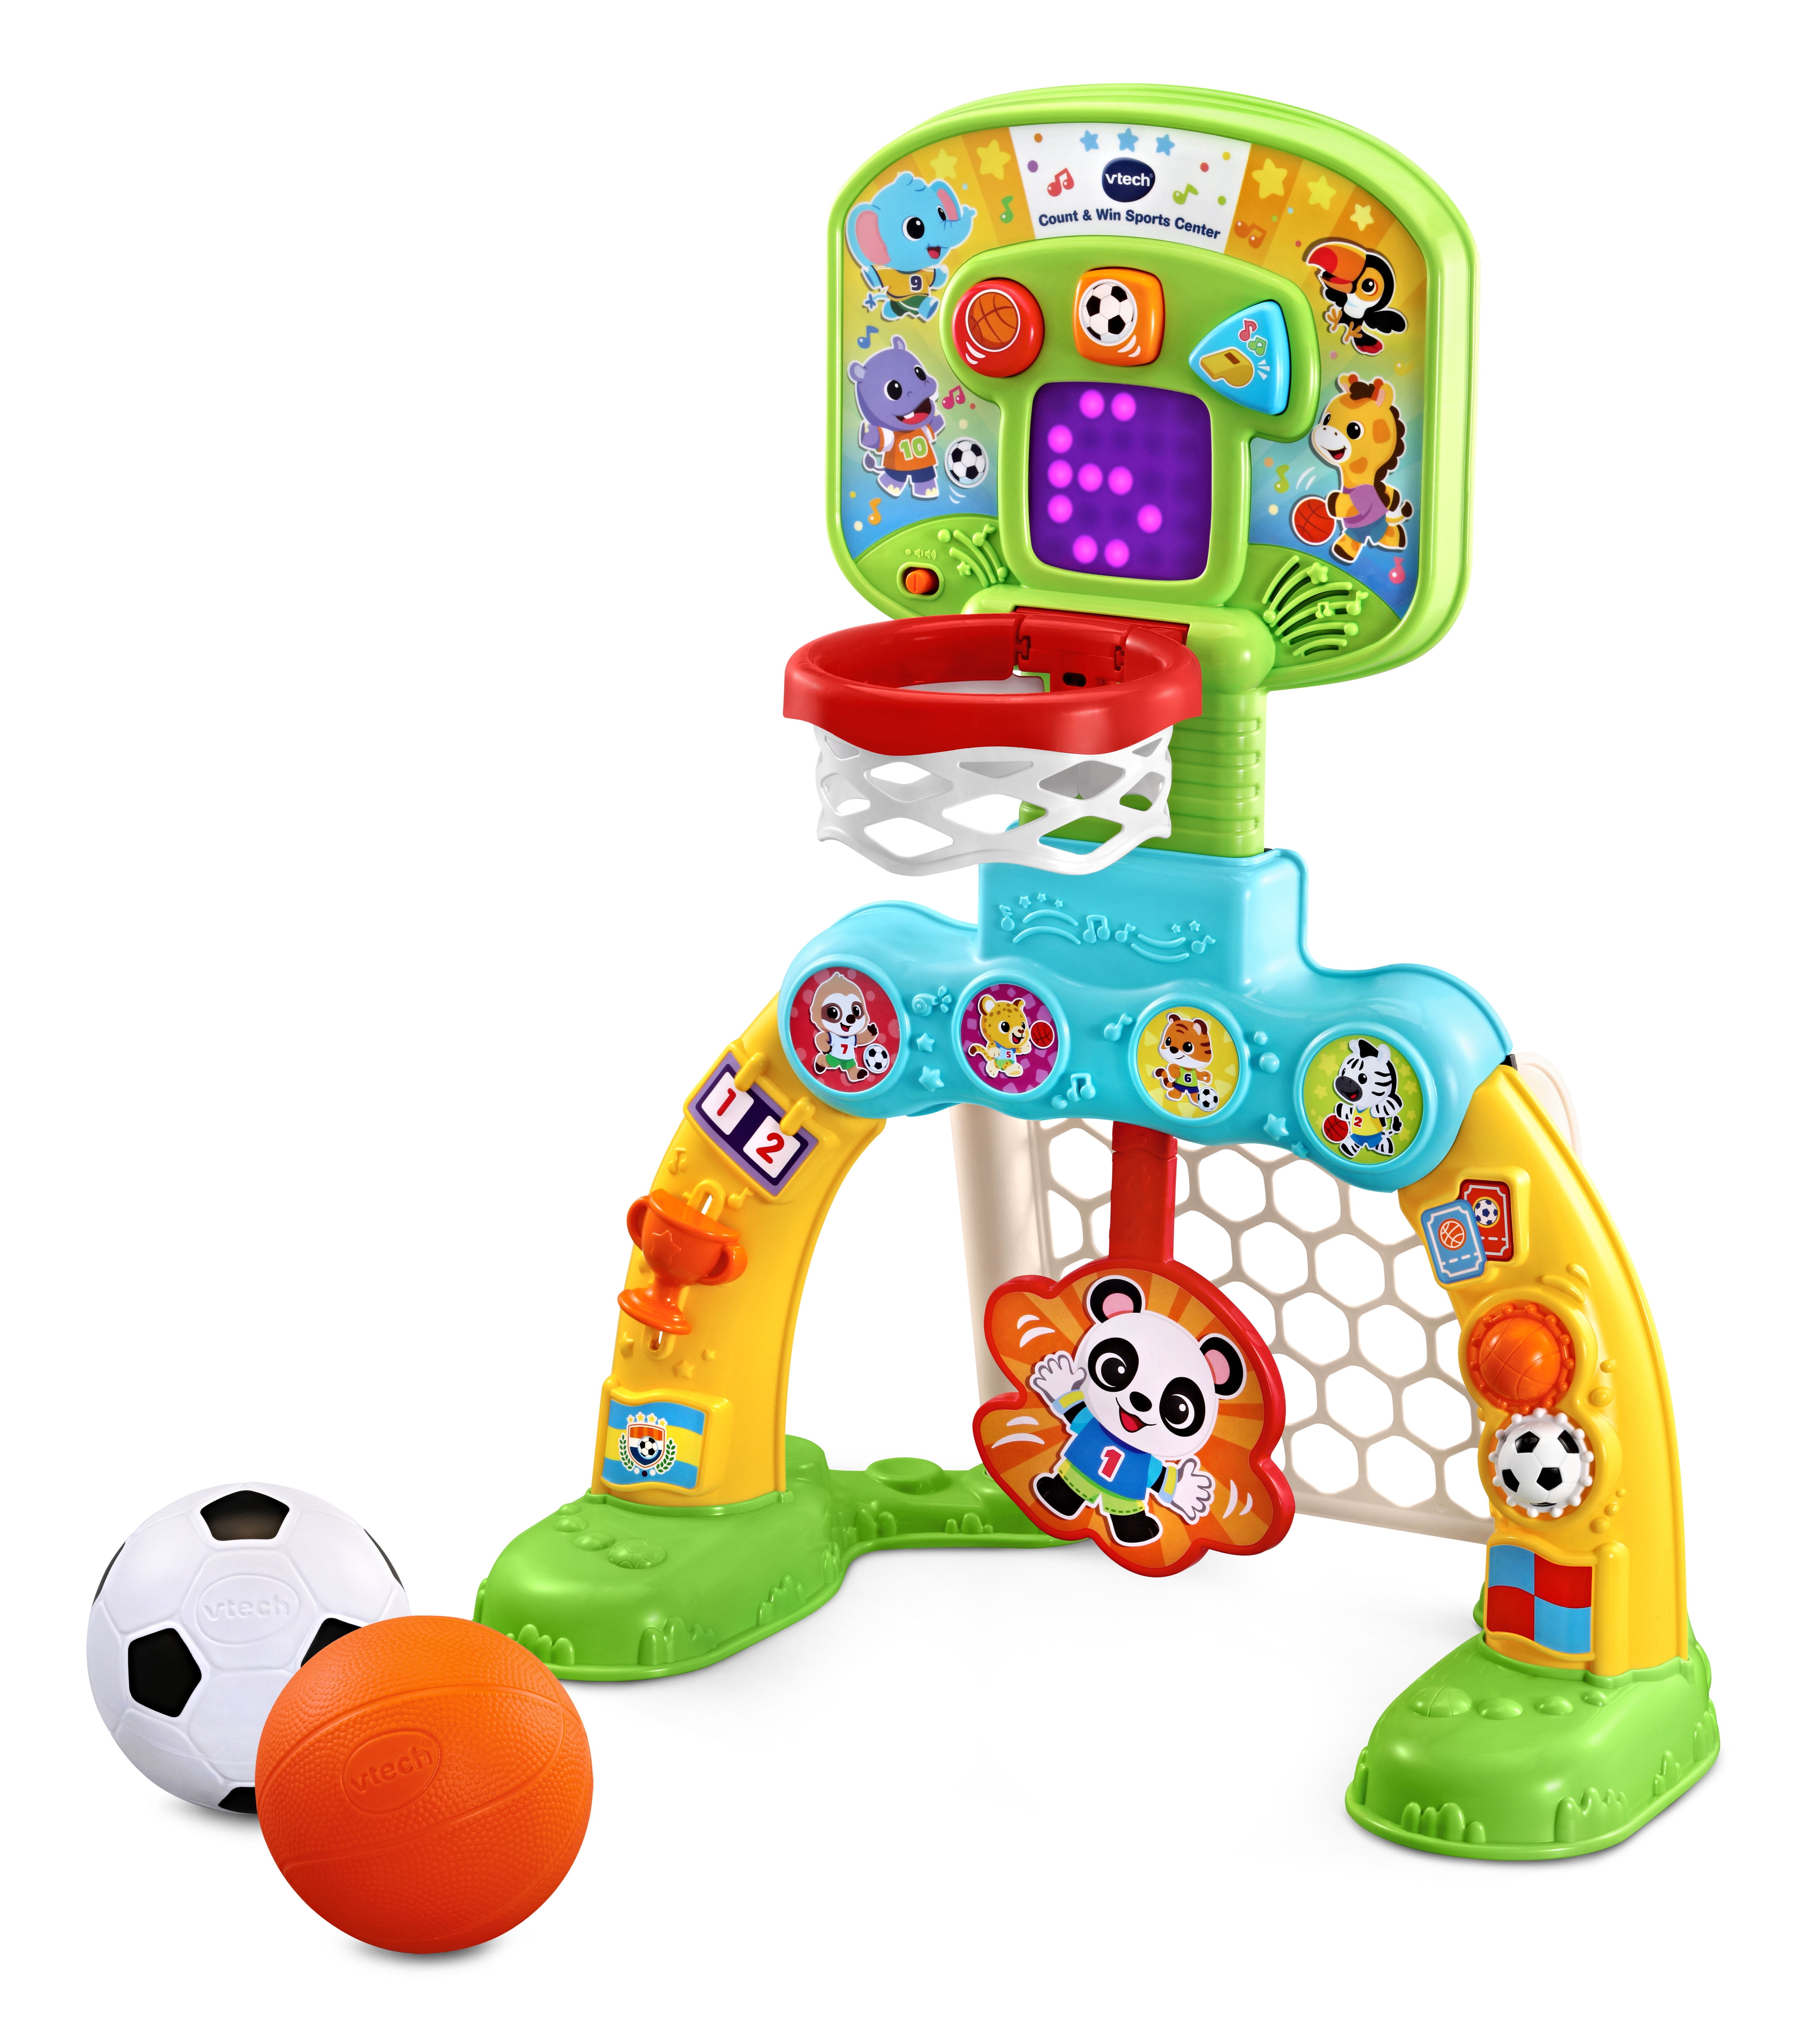 VTech Count and Win Sports Center Toddler Basketball and Soccer Smart Toy 